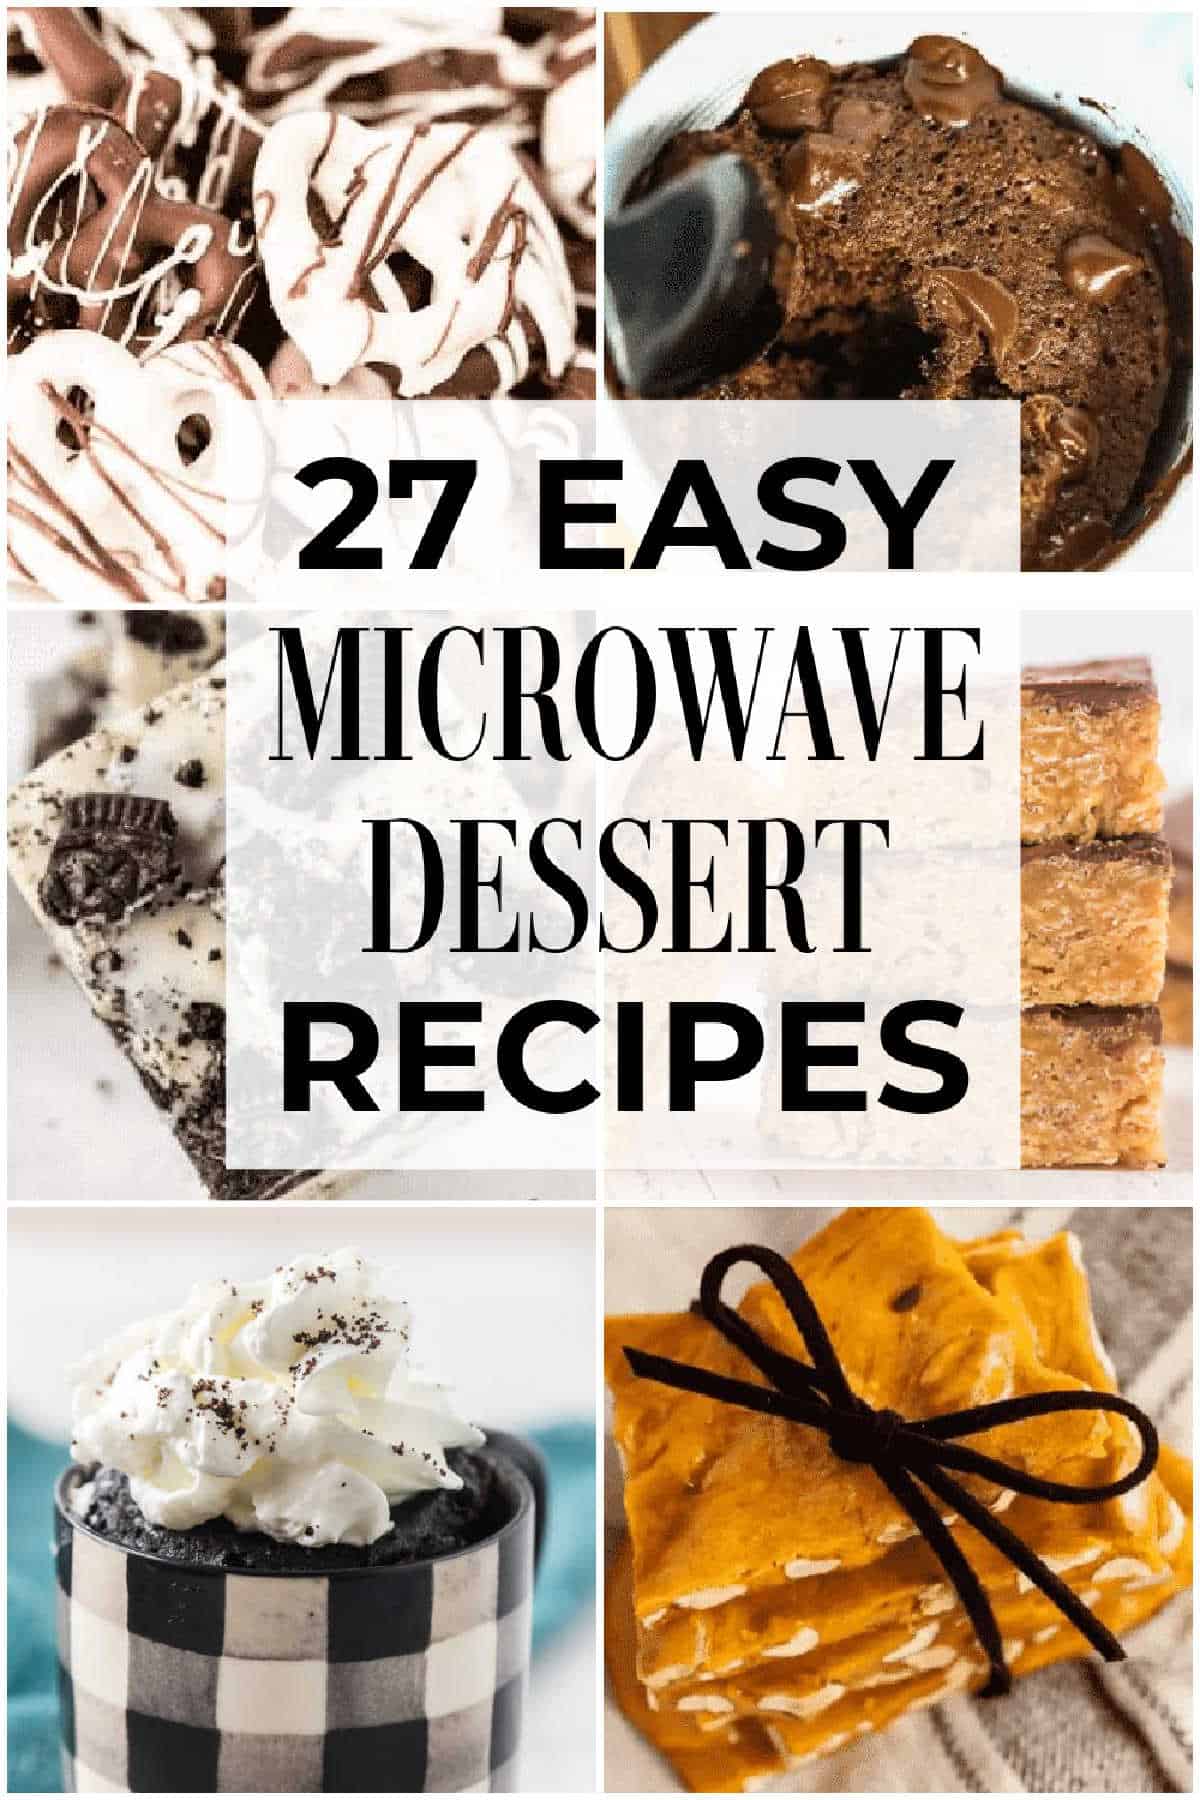 The next time you have a sweet craving, try 27 Easy Microwave Desserts for Quick Treats. These microwave dessert recipes take just seconds. Learn how to make desserts in a mug, plus some that are healthy and keto friendly too! You will love these quick microwave desserts.  #dessertsonadime #easydesserts #microwavedesserts 